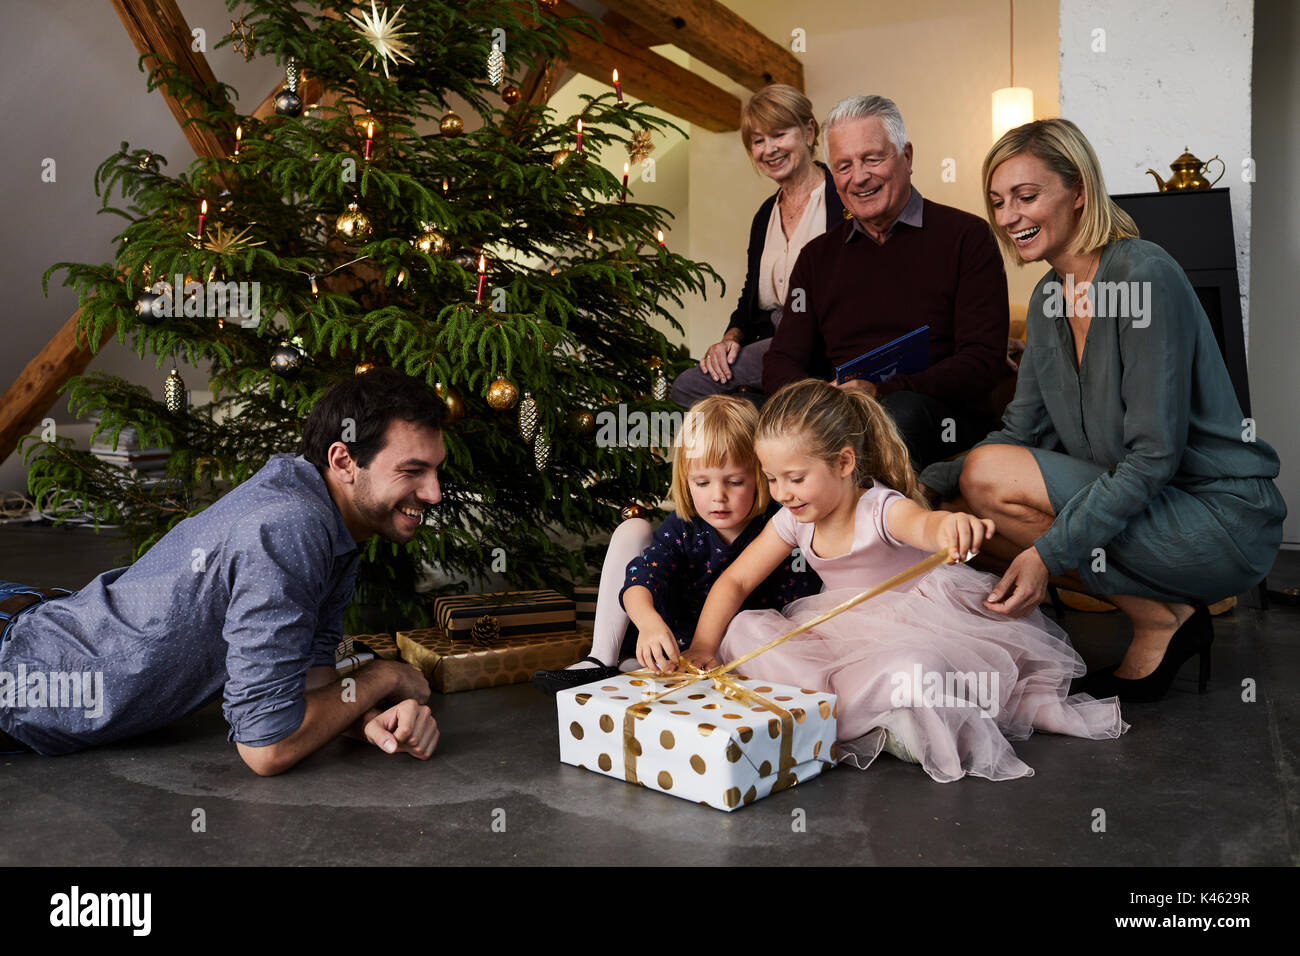 Family with children and grandparents in front of Christmas tree, Christmas Eve Stock Photo